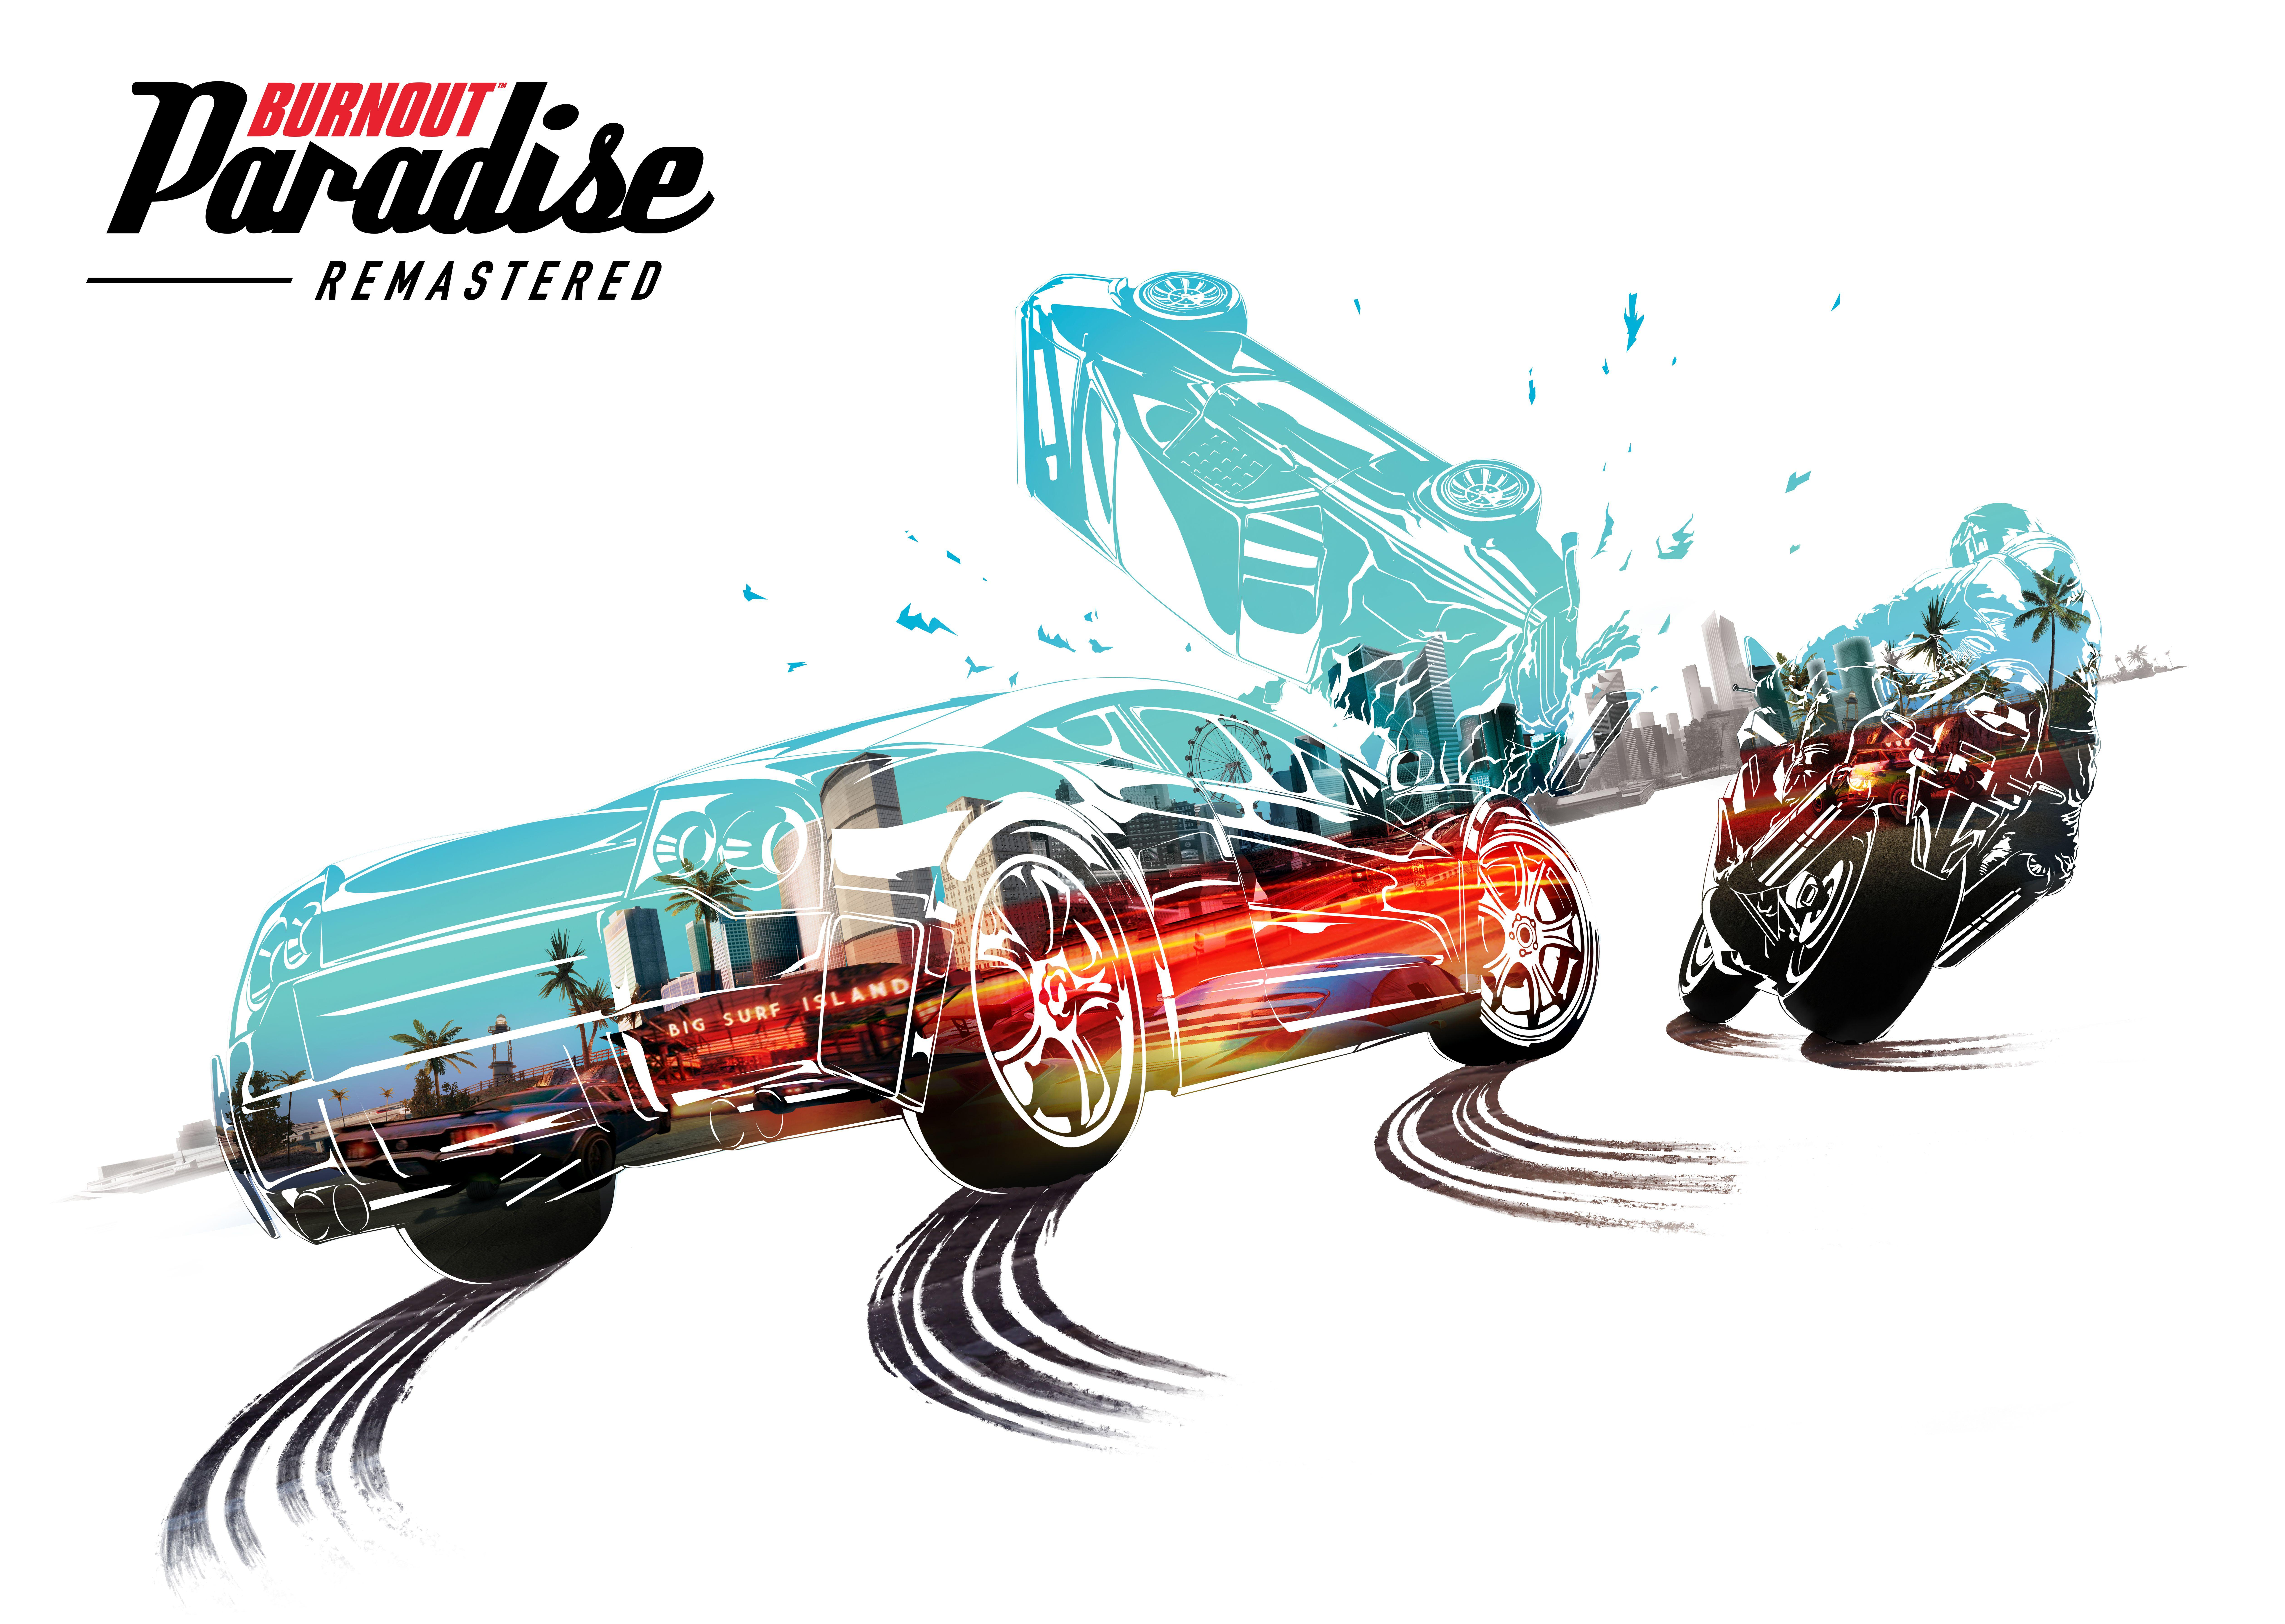 Burnout Paradise Logo - Burnout Paradise Remastered Is Coming to PlayStation 4 and Xbox One ...